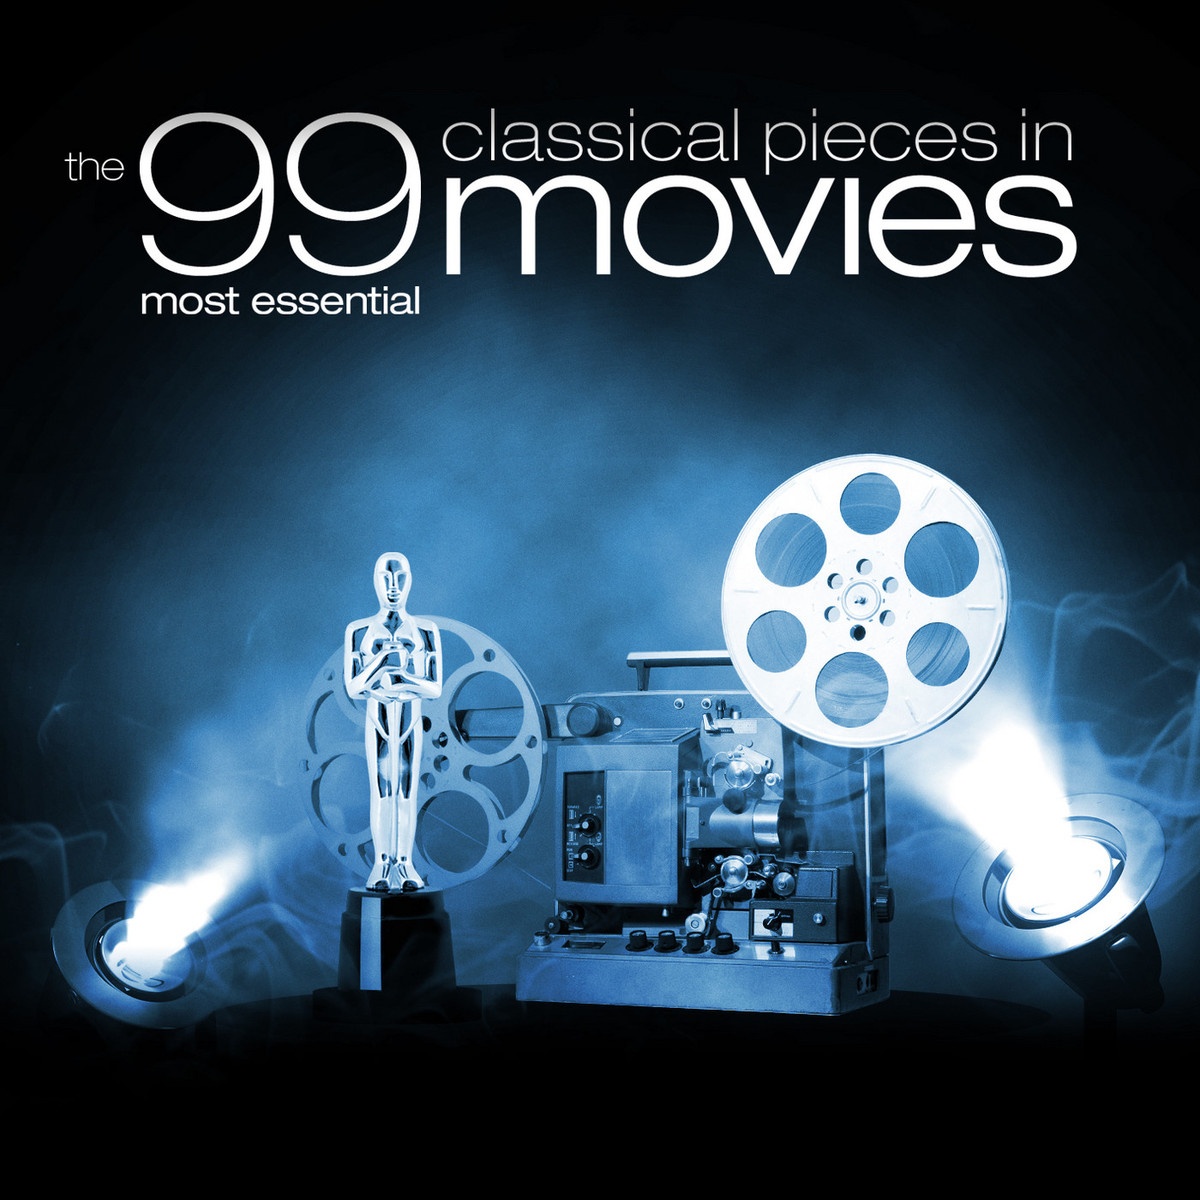 Concerto in A Major for Clarinet and Orchestra, K. 622: II. Adagio (from 27 Dresses)